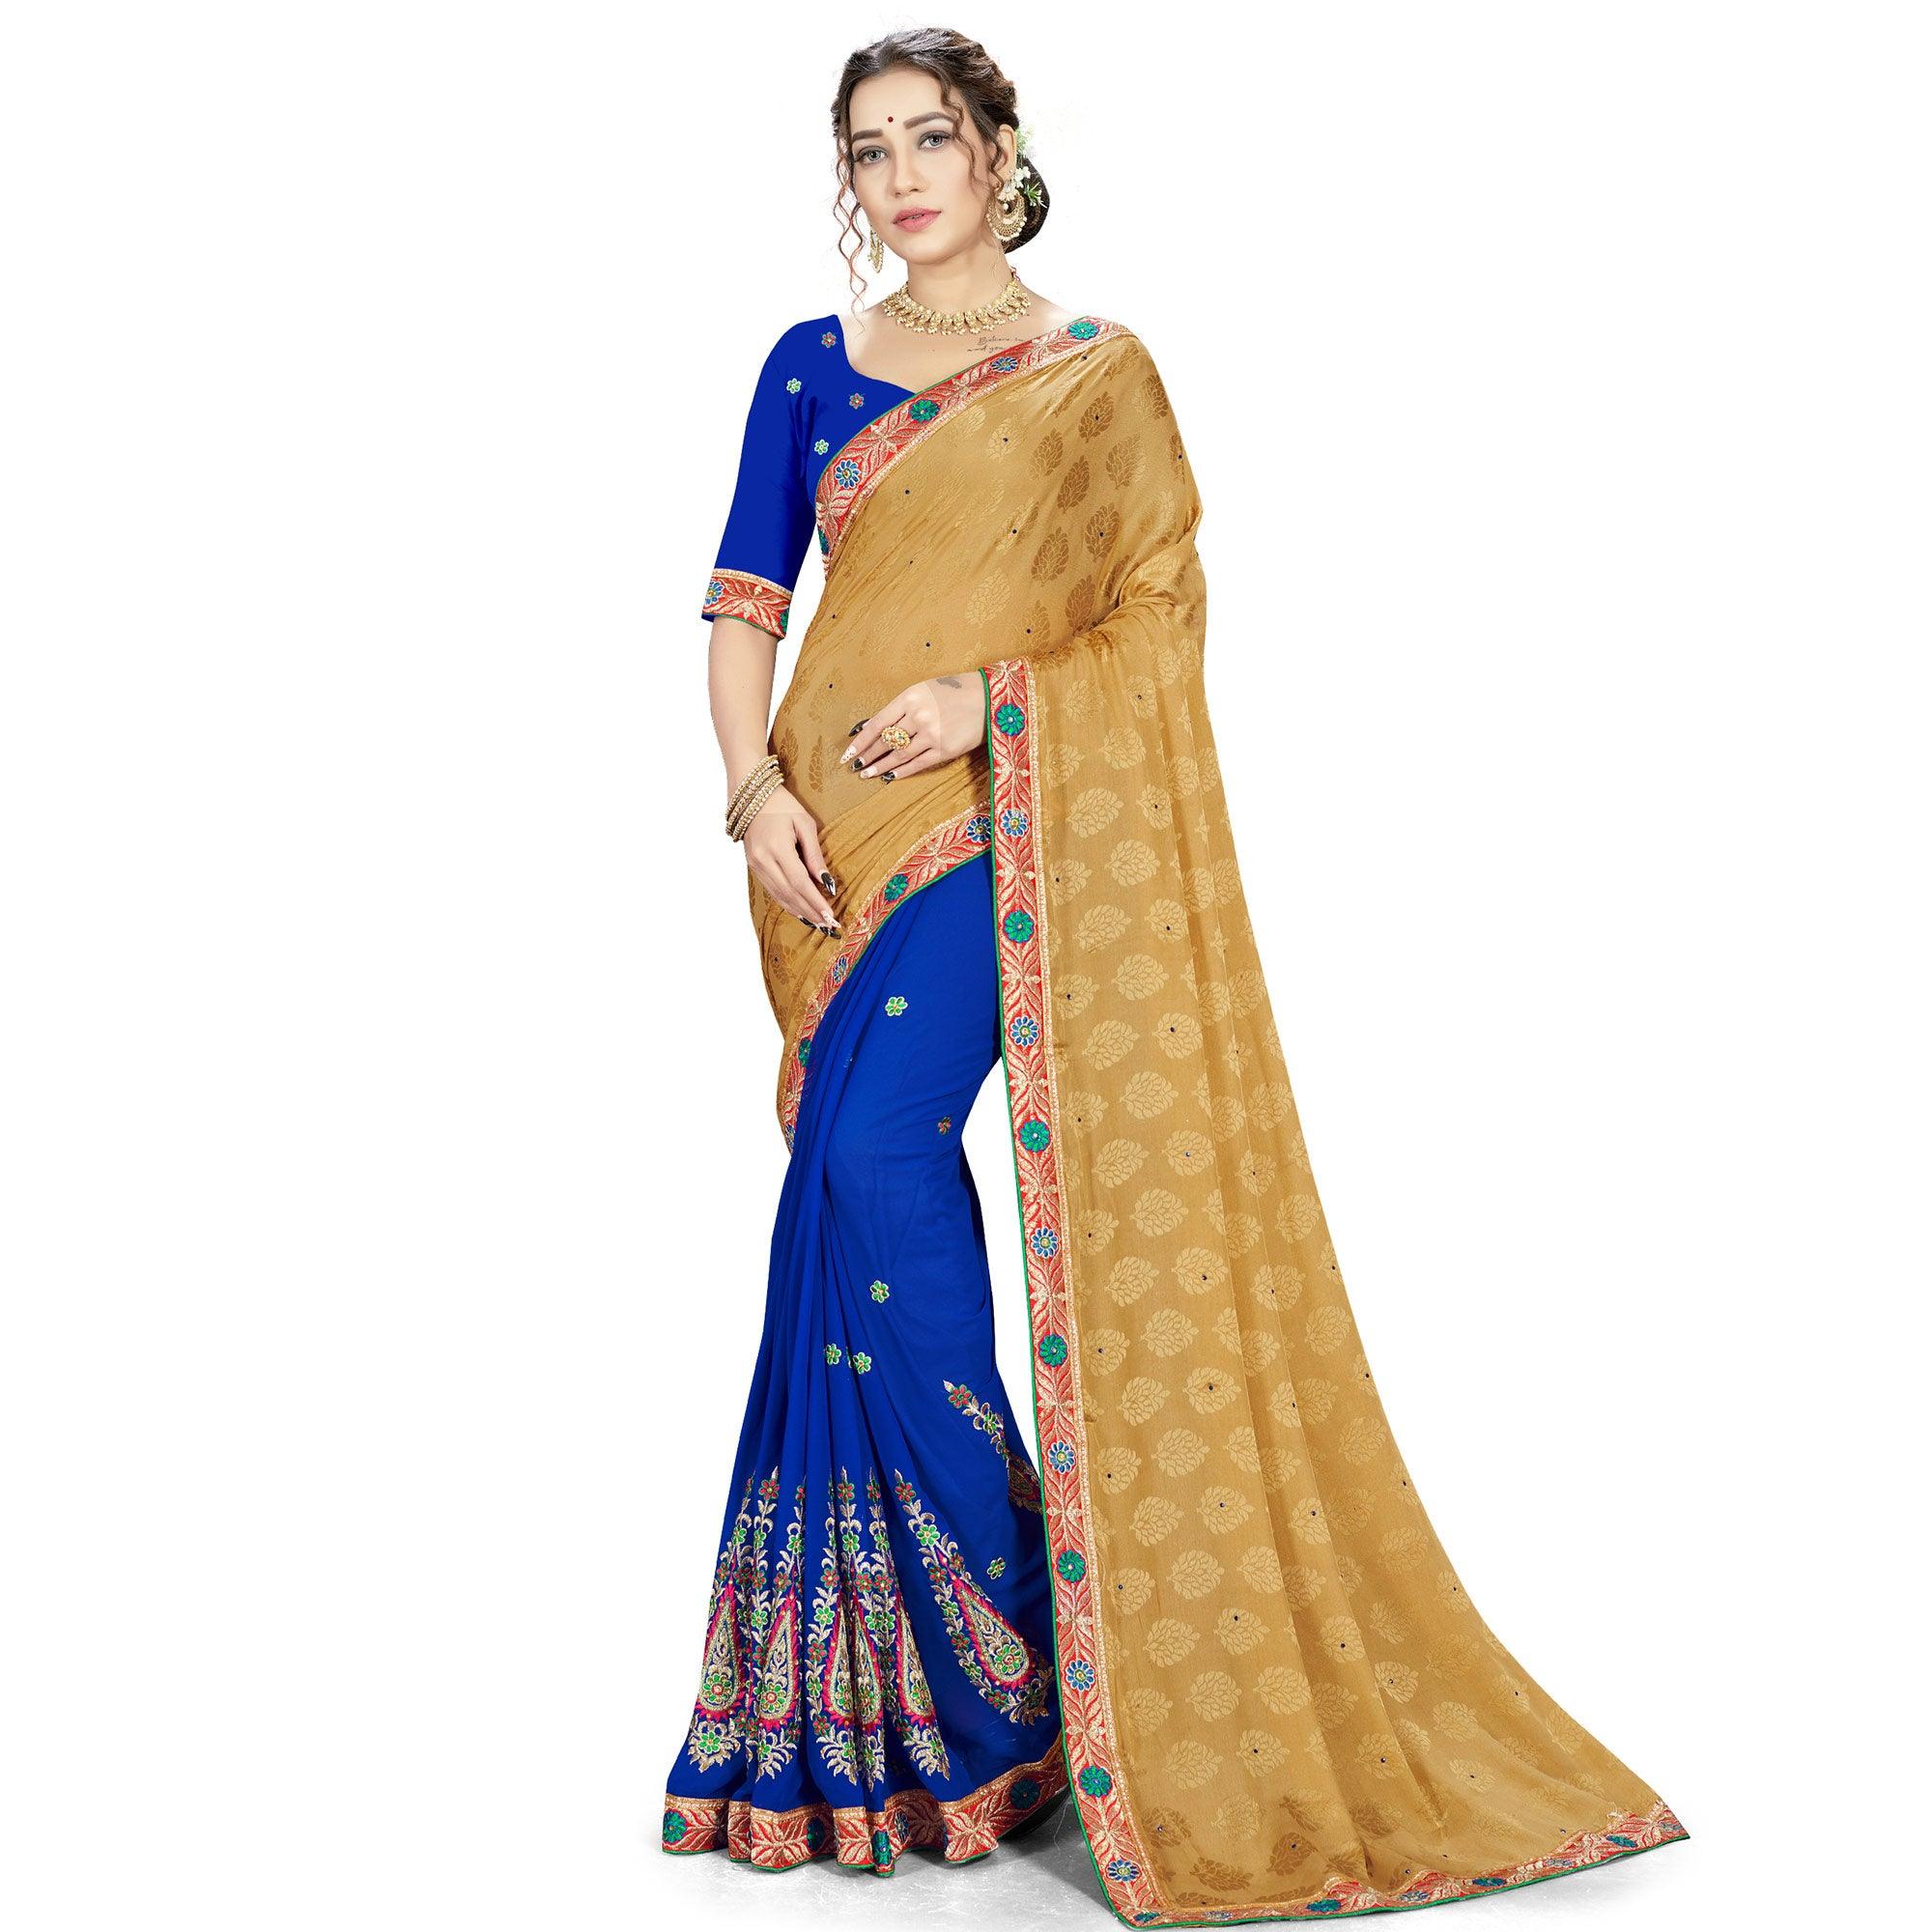 Ravishing Brown-Blue Colored party Wear Embroidered Georgette Half-Half Saree - Peachmode